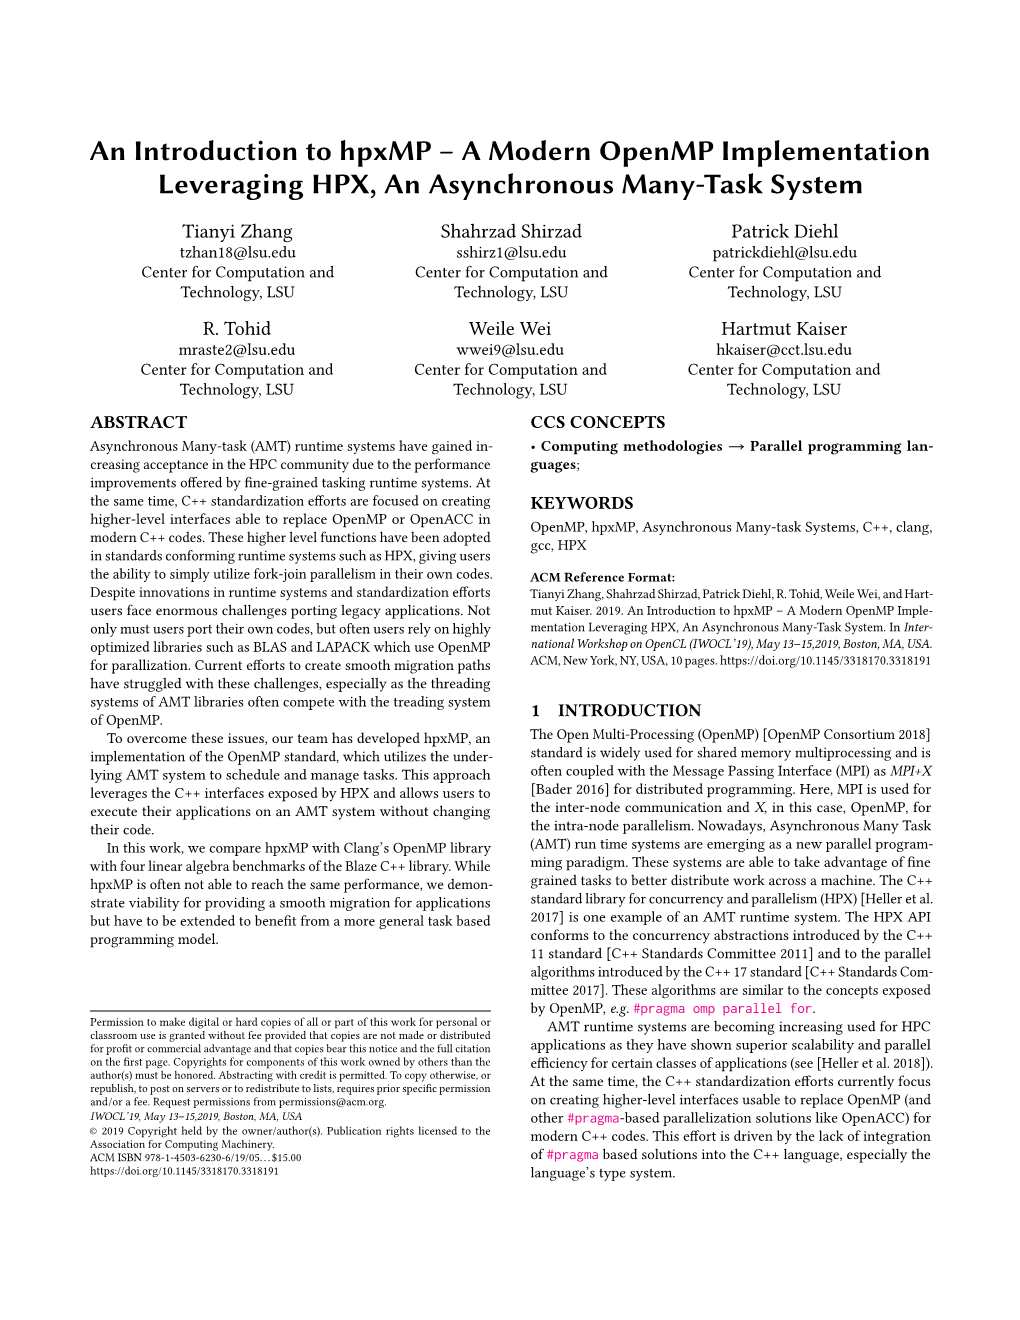 A Modern Openmp Implementation Leveraging HPX, an Asynchronous Many-Task System